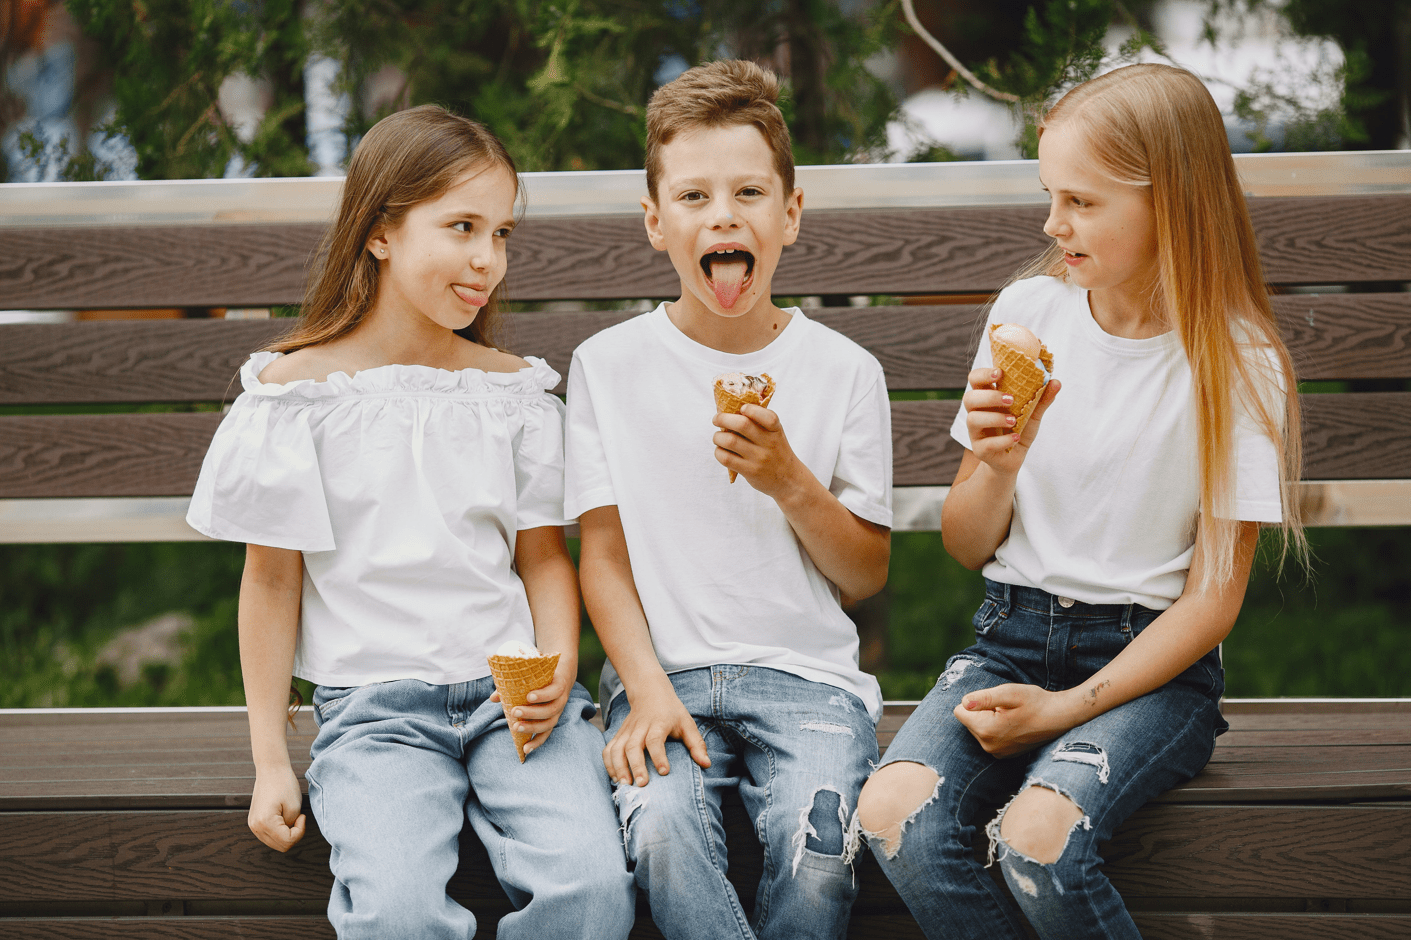 Kids eating ice cream on park bench while sticking out their tongue